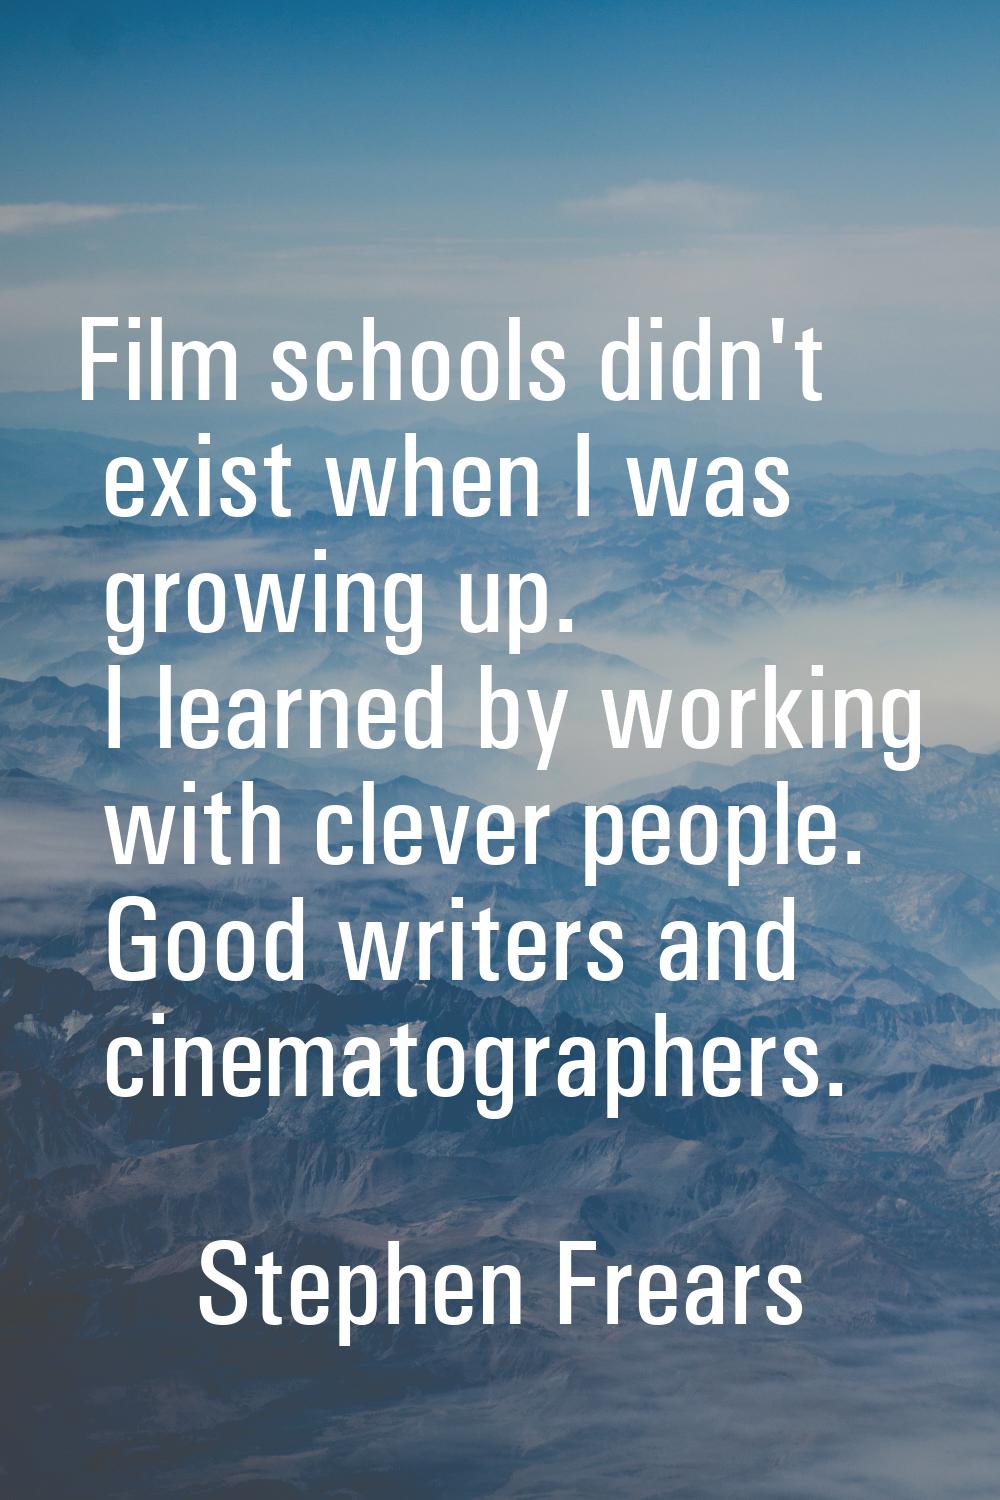 Film schools didn't exist when I was growing up. I learned by working with clever people. Good writ